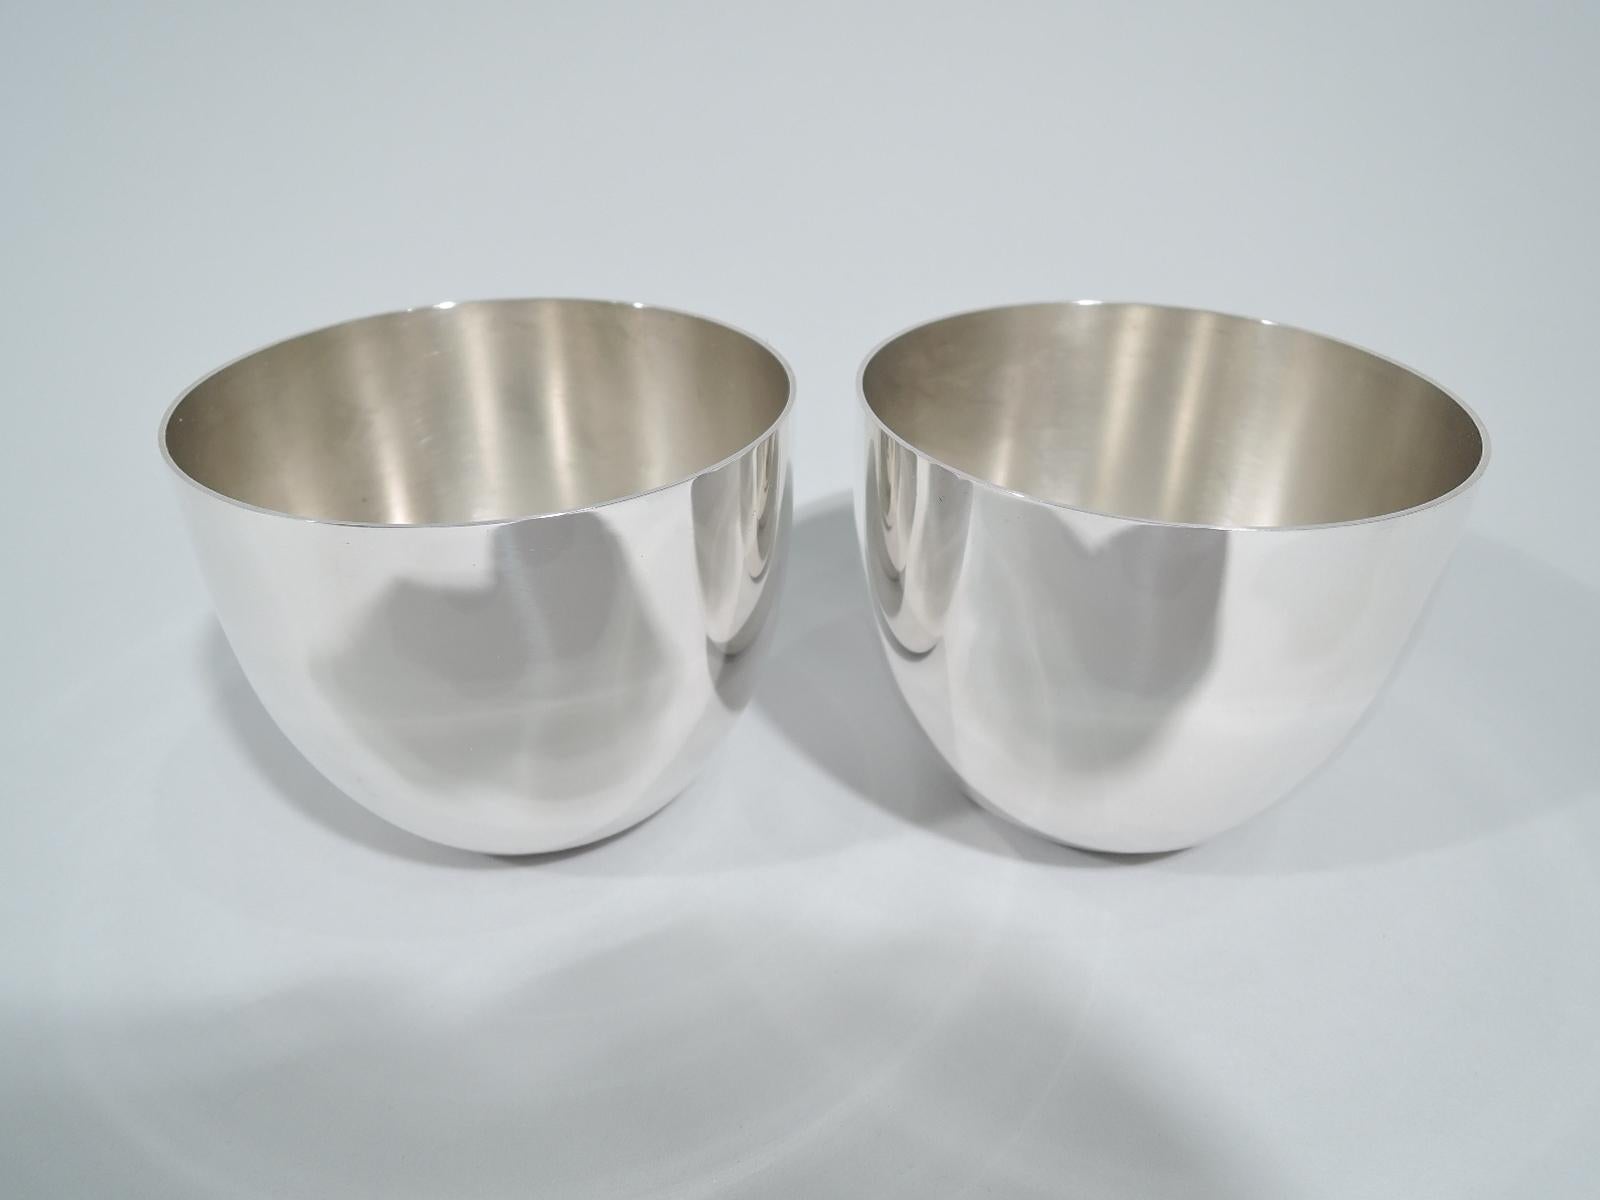 Pair of sterling silver Jefferson cups. Made by Stieff in Baltimore. Each: Straight sides and curved bottom. Easy grip with a gentle, soothing rock. Great for a lockdown twosome tipple. Fully marked including no. 0709/15 and phrase “Jefferson Cup”.